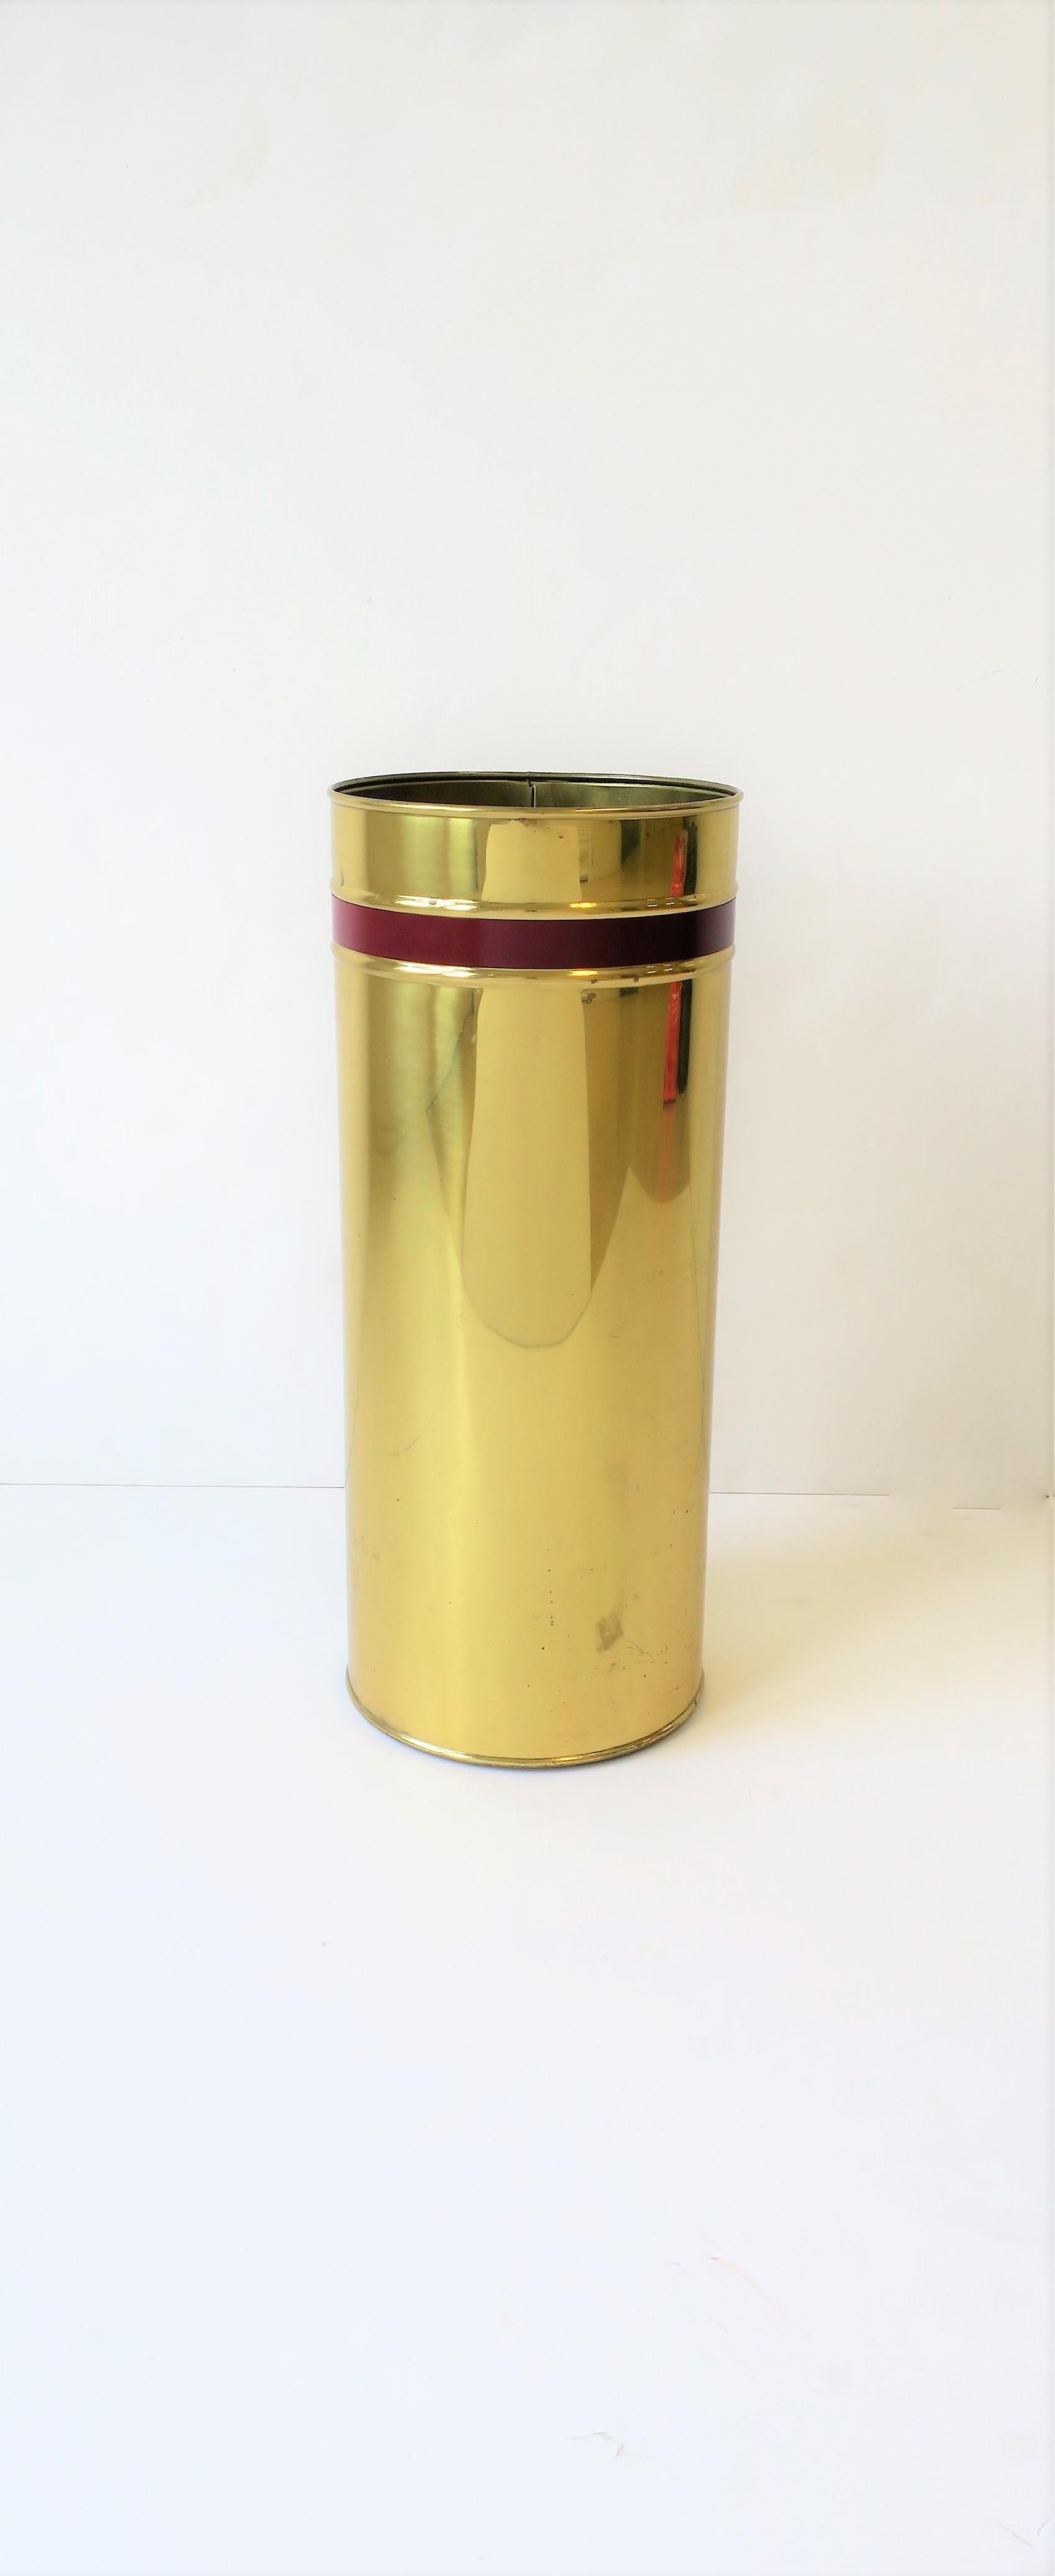 Lacquered English Brass Umbrella Stand or Holder with Red Burgundy Stripe